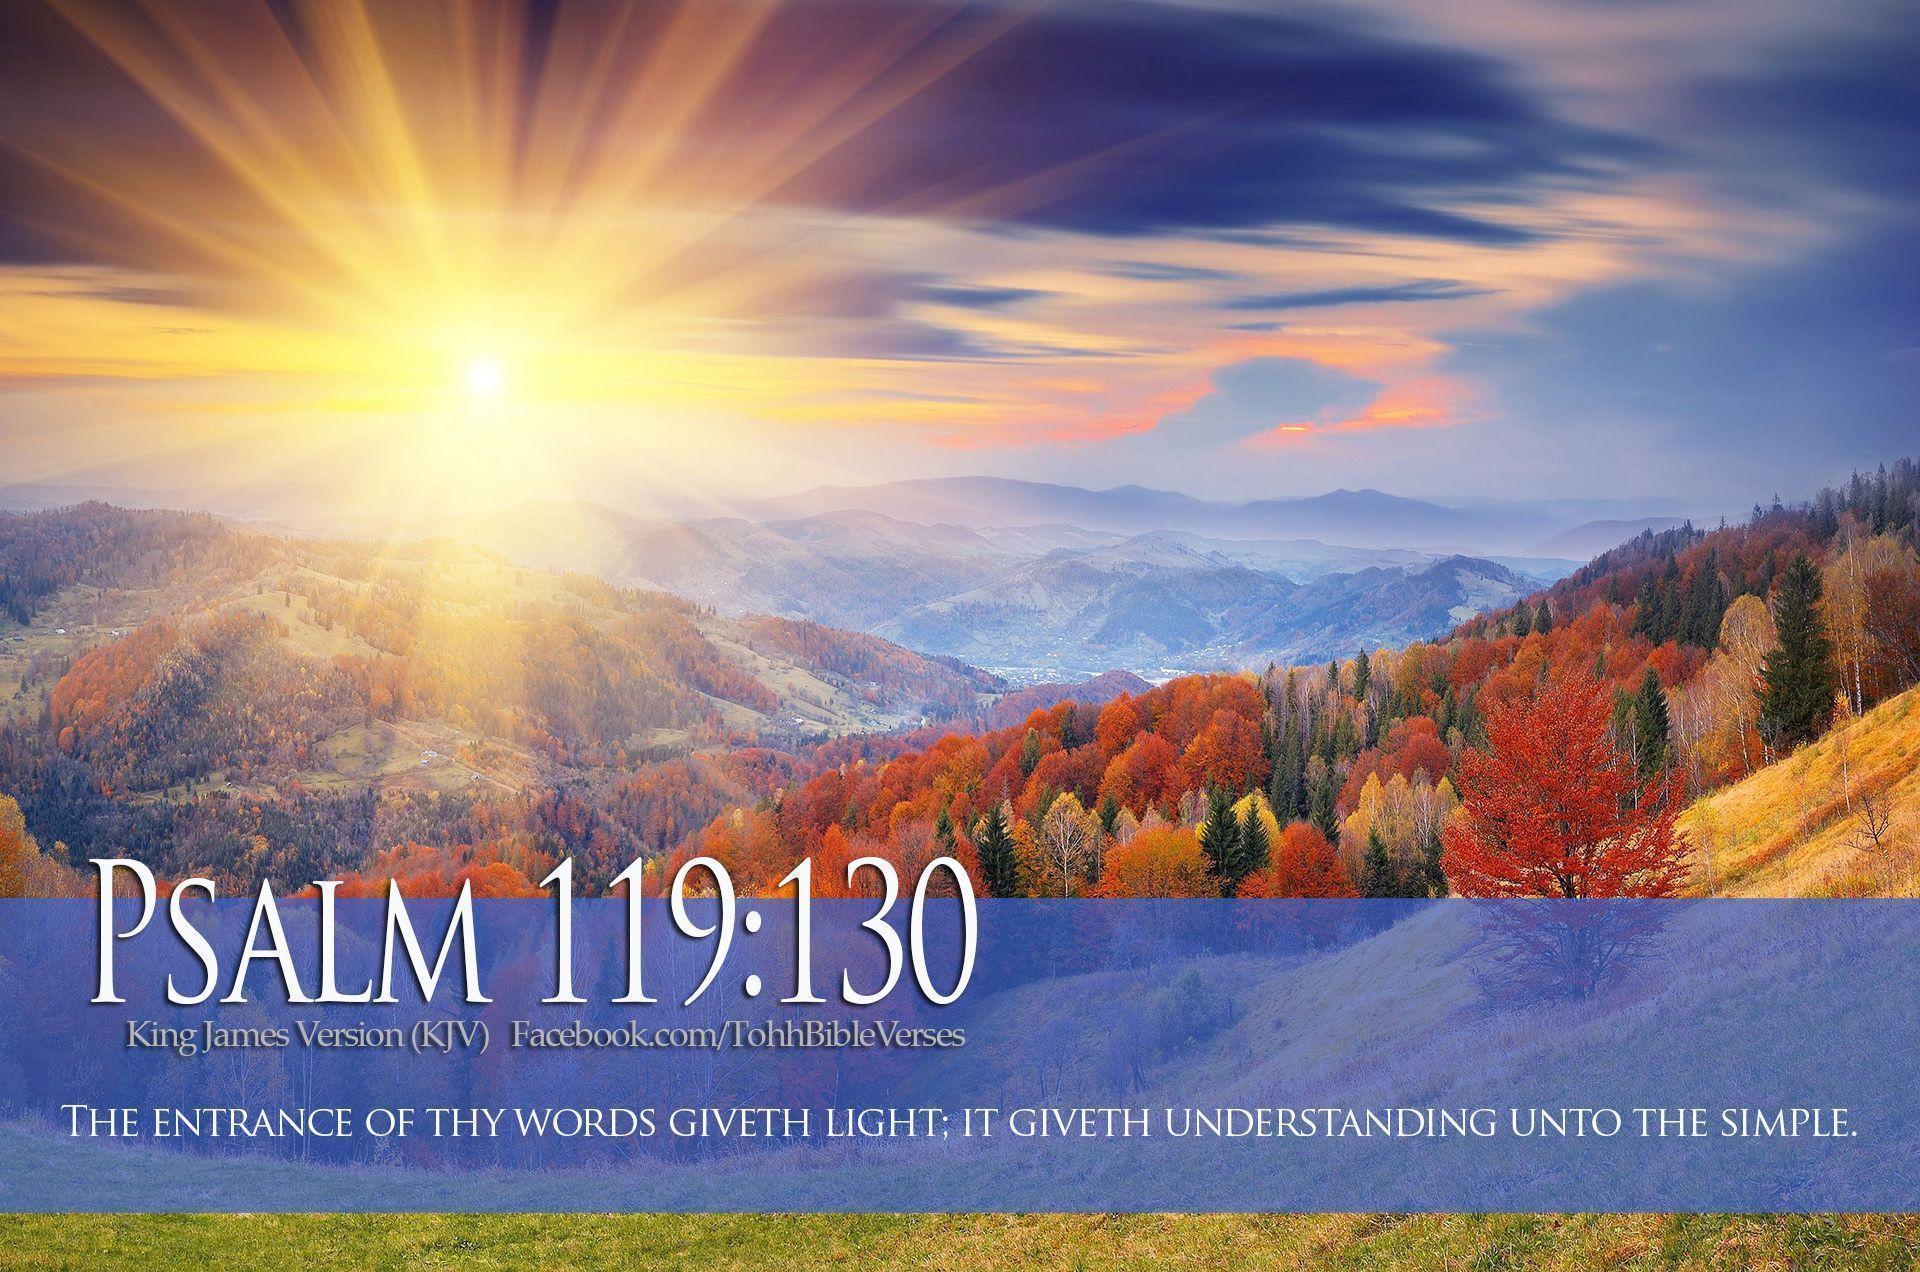 TOHH Bible Verses Picture And Wallpaper